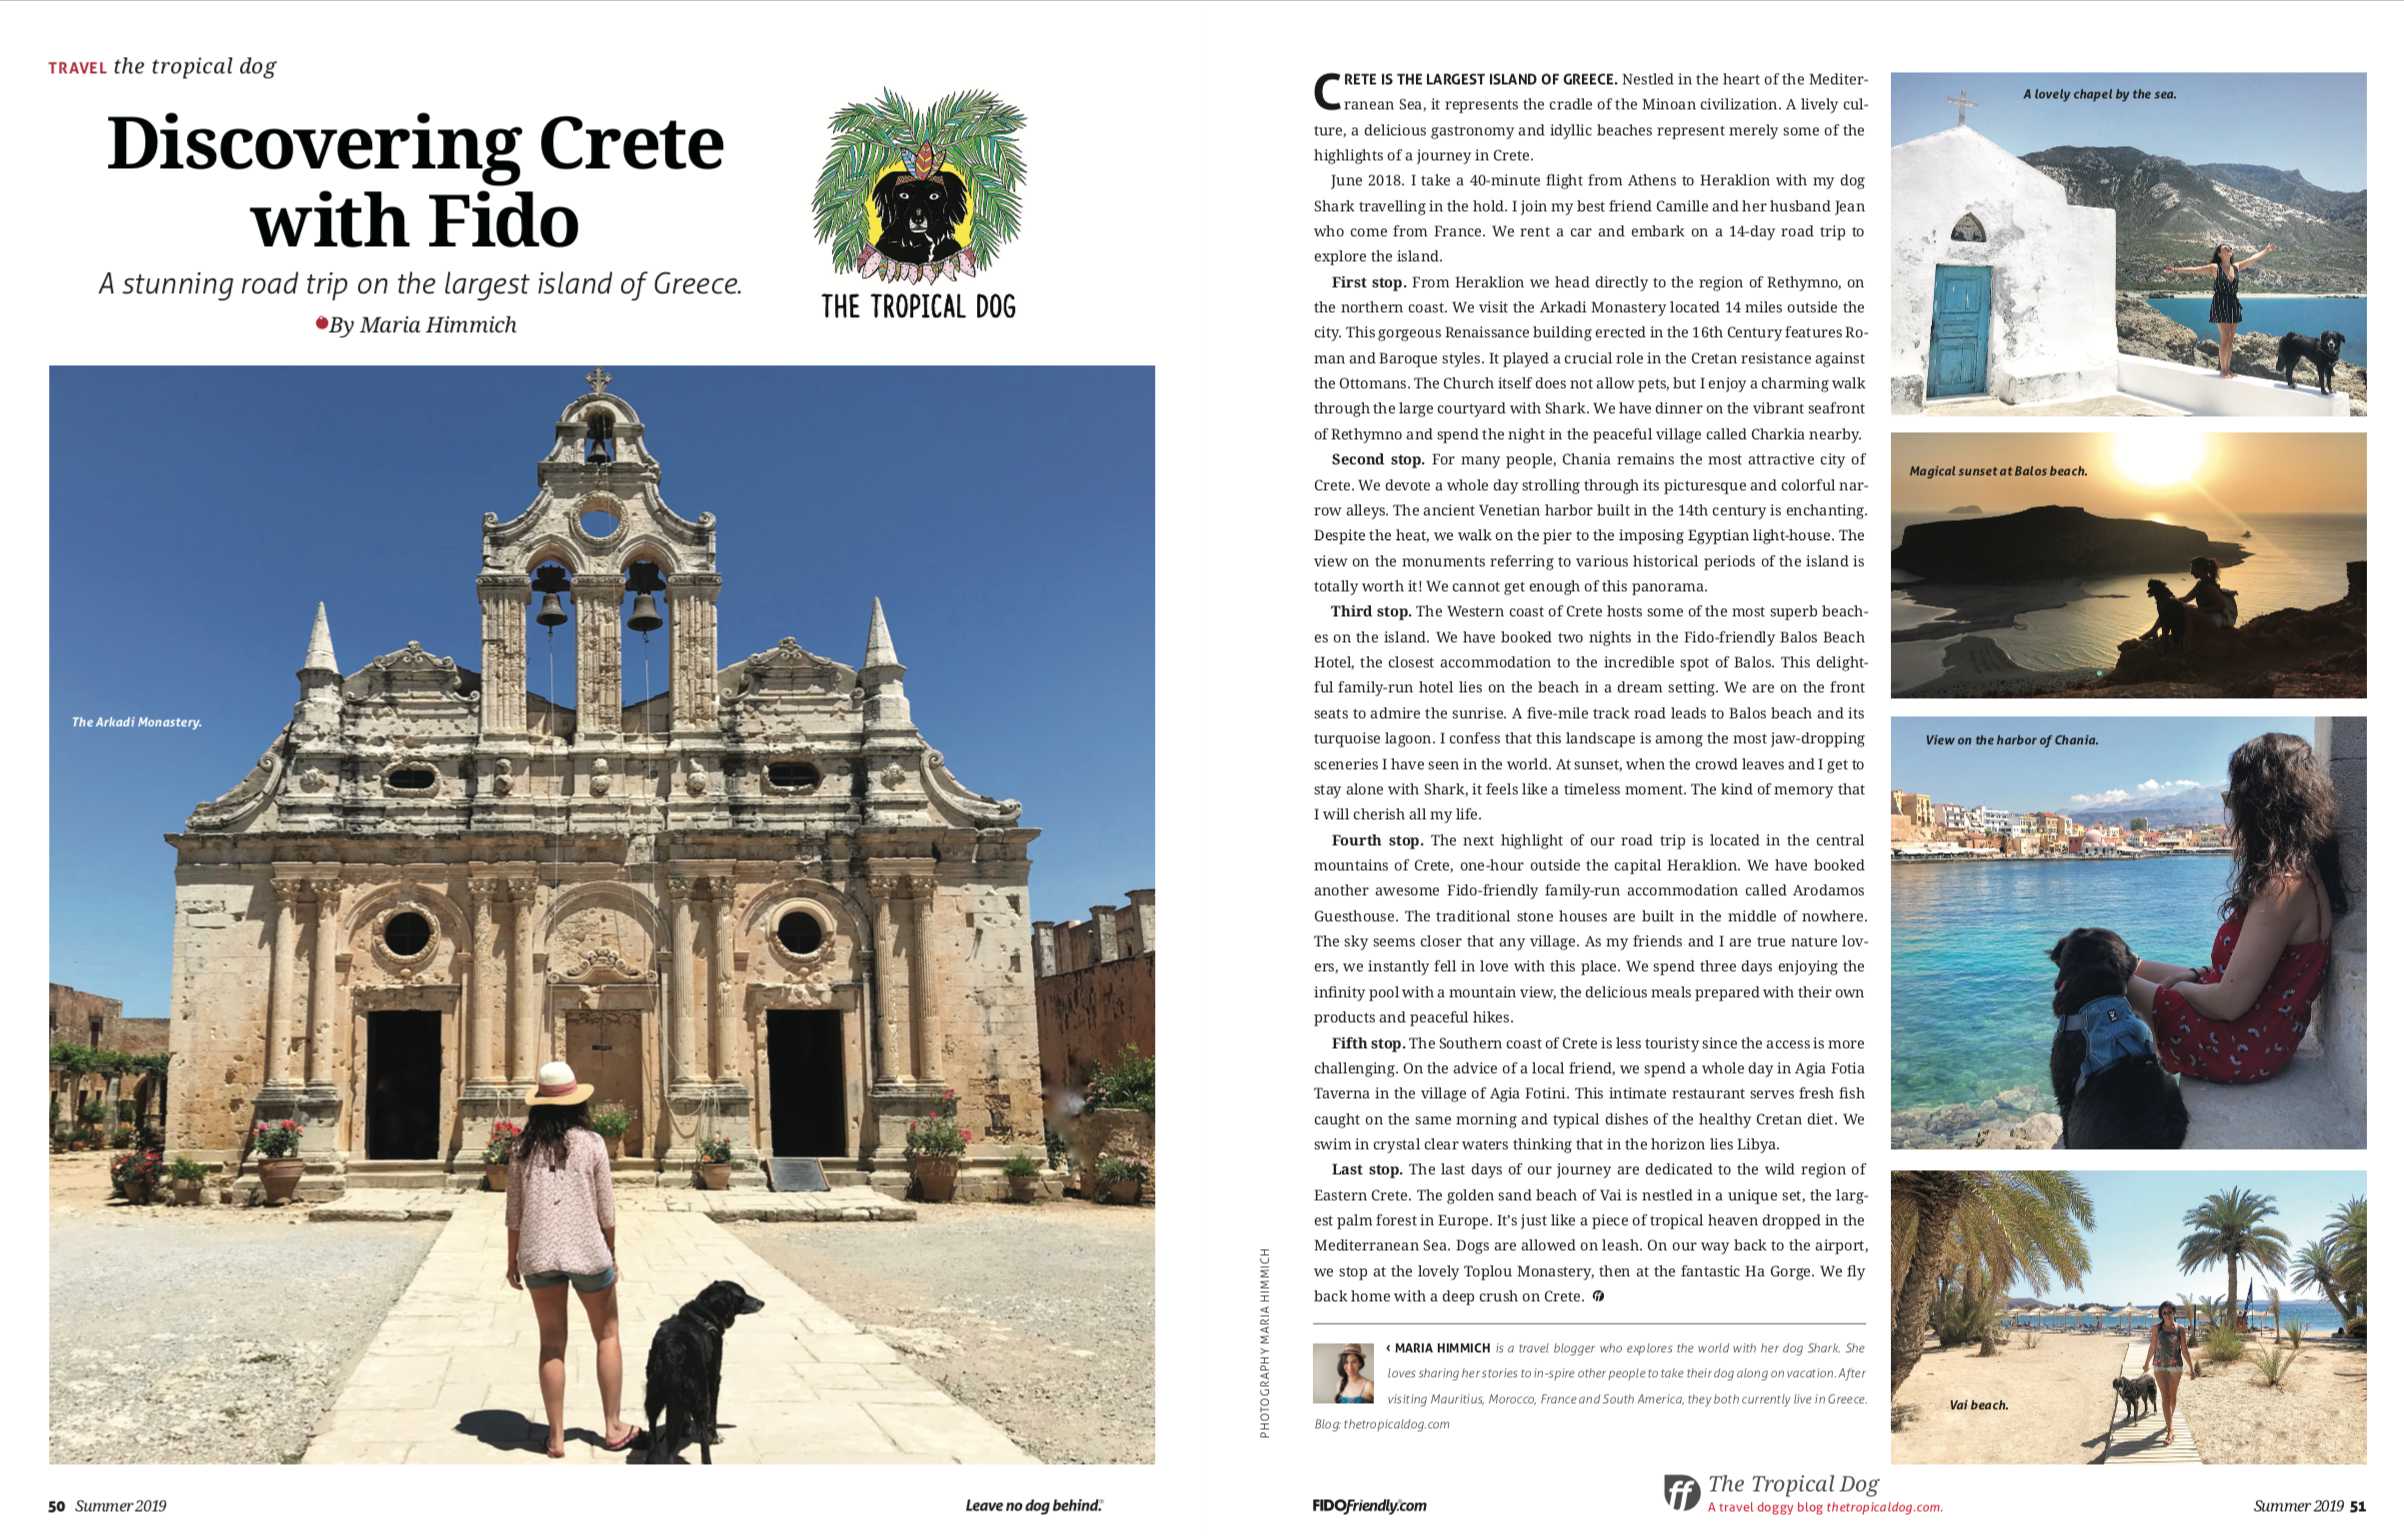 The Tropical Dog in Fido friendly magazine